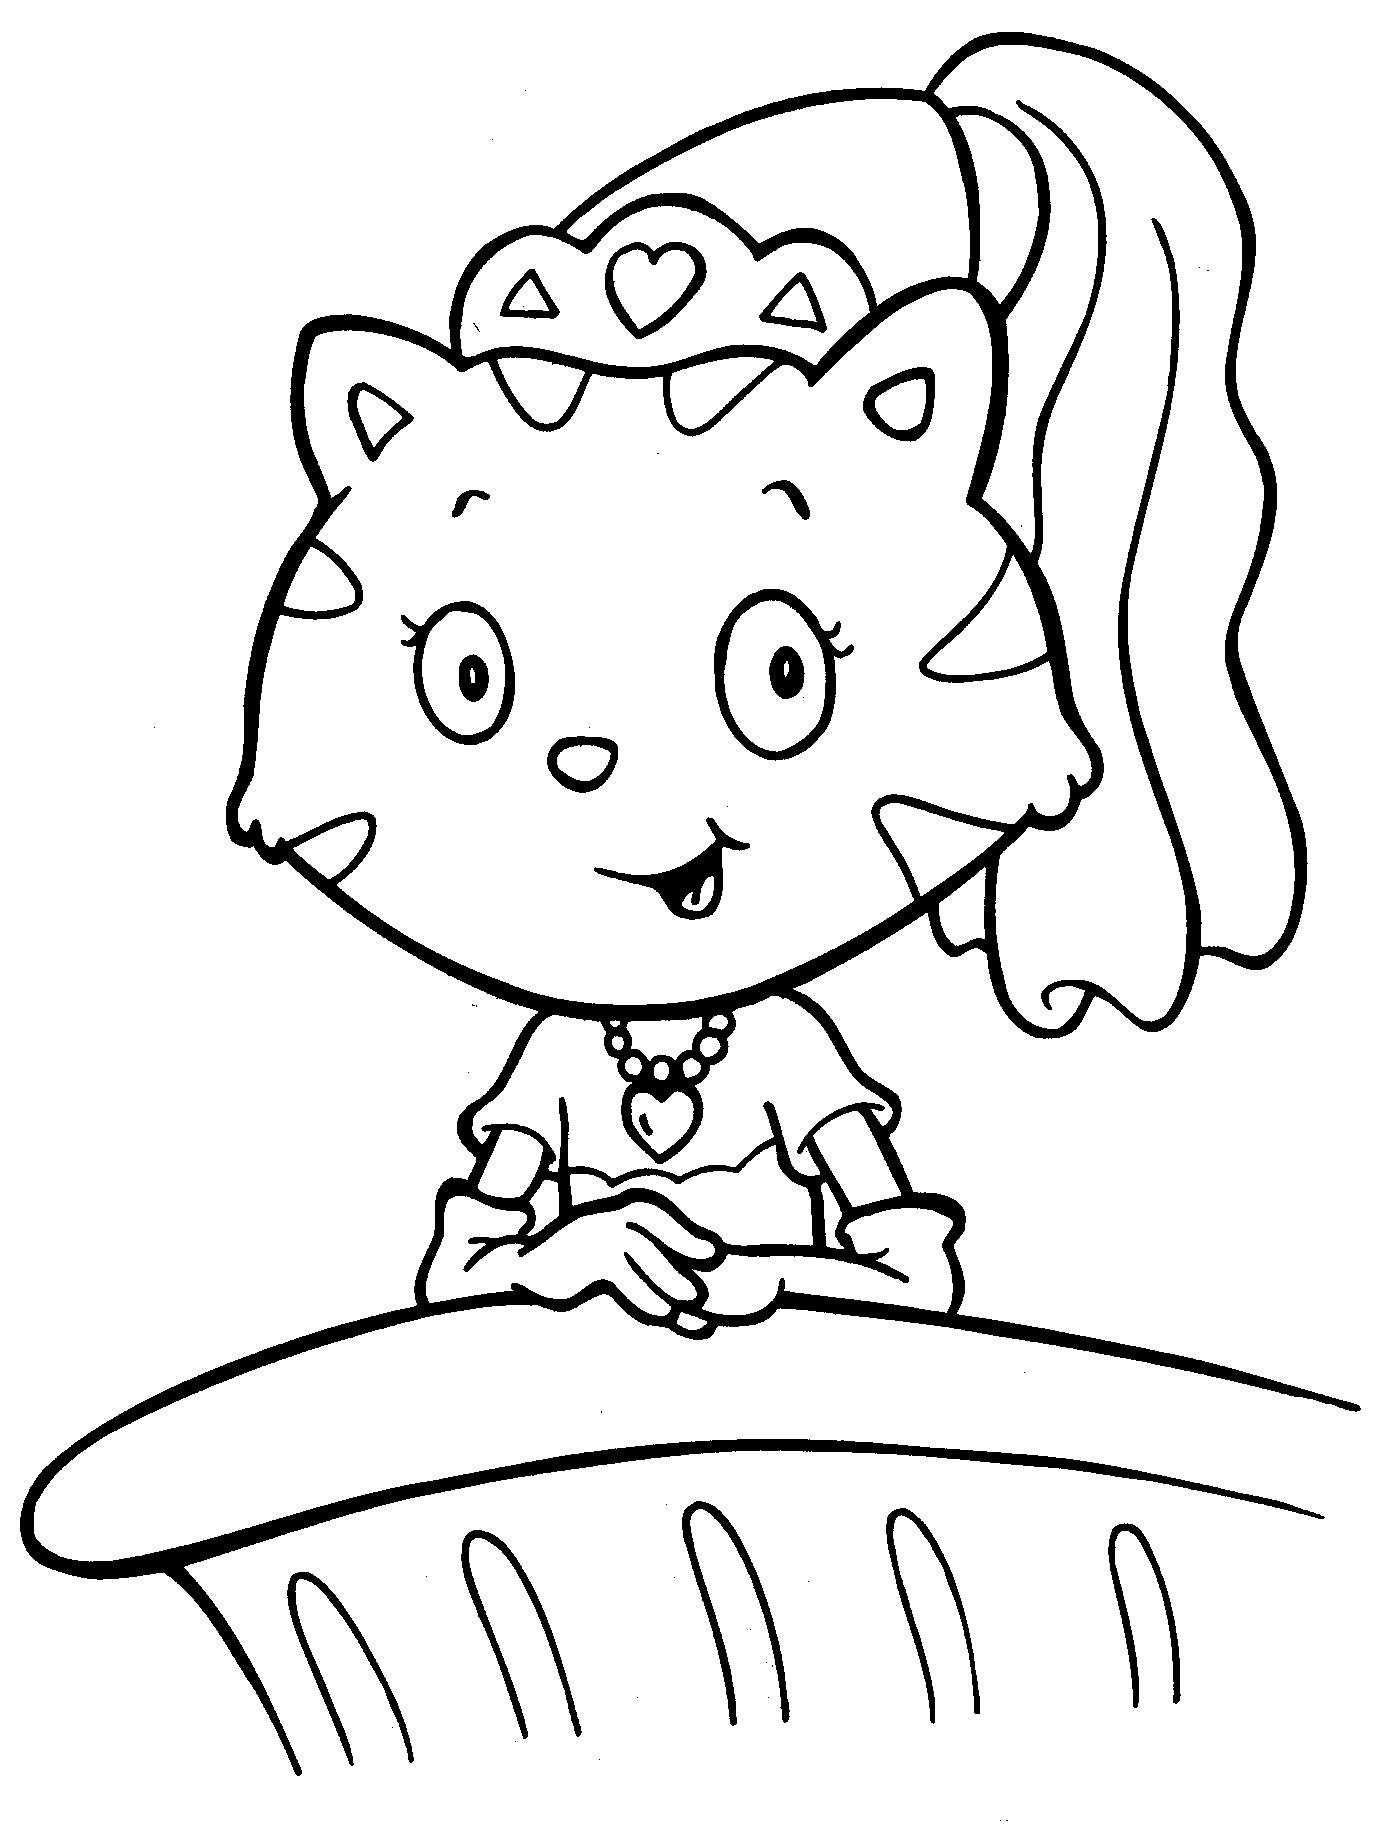 Cat Coloring Pages For Kids
 Kitten Coloring Pages Best Coloring Pages For Kids